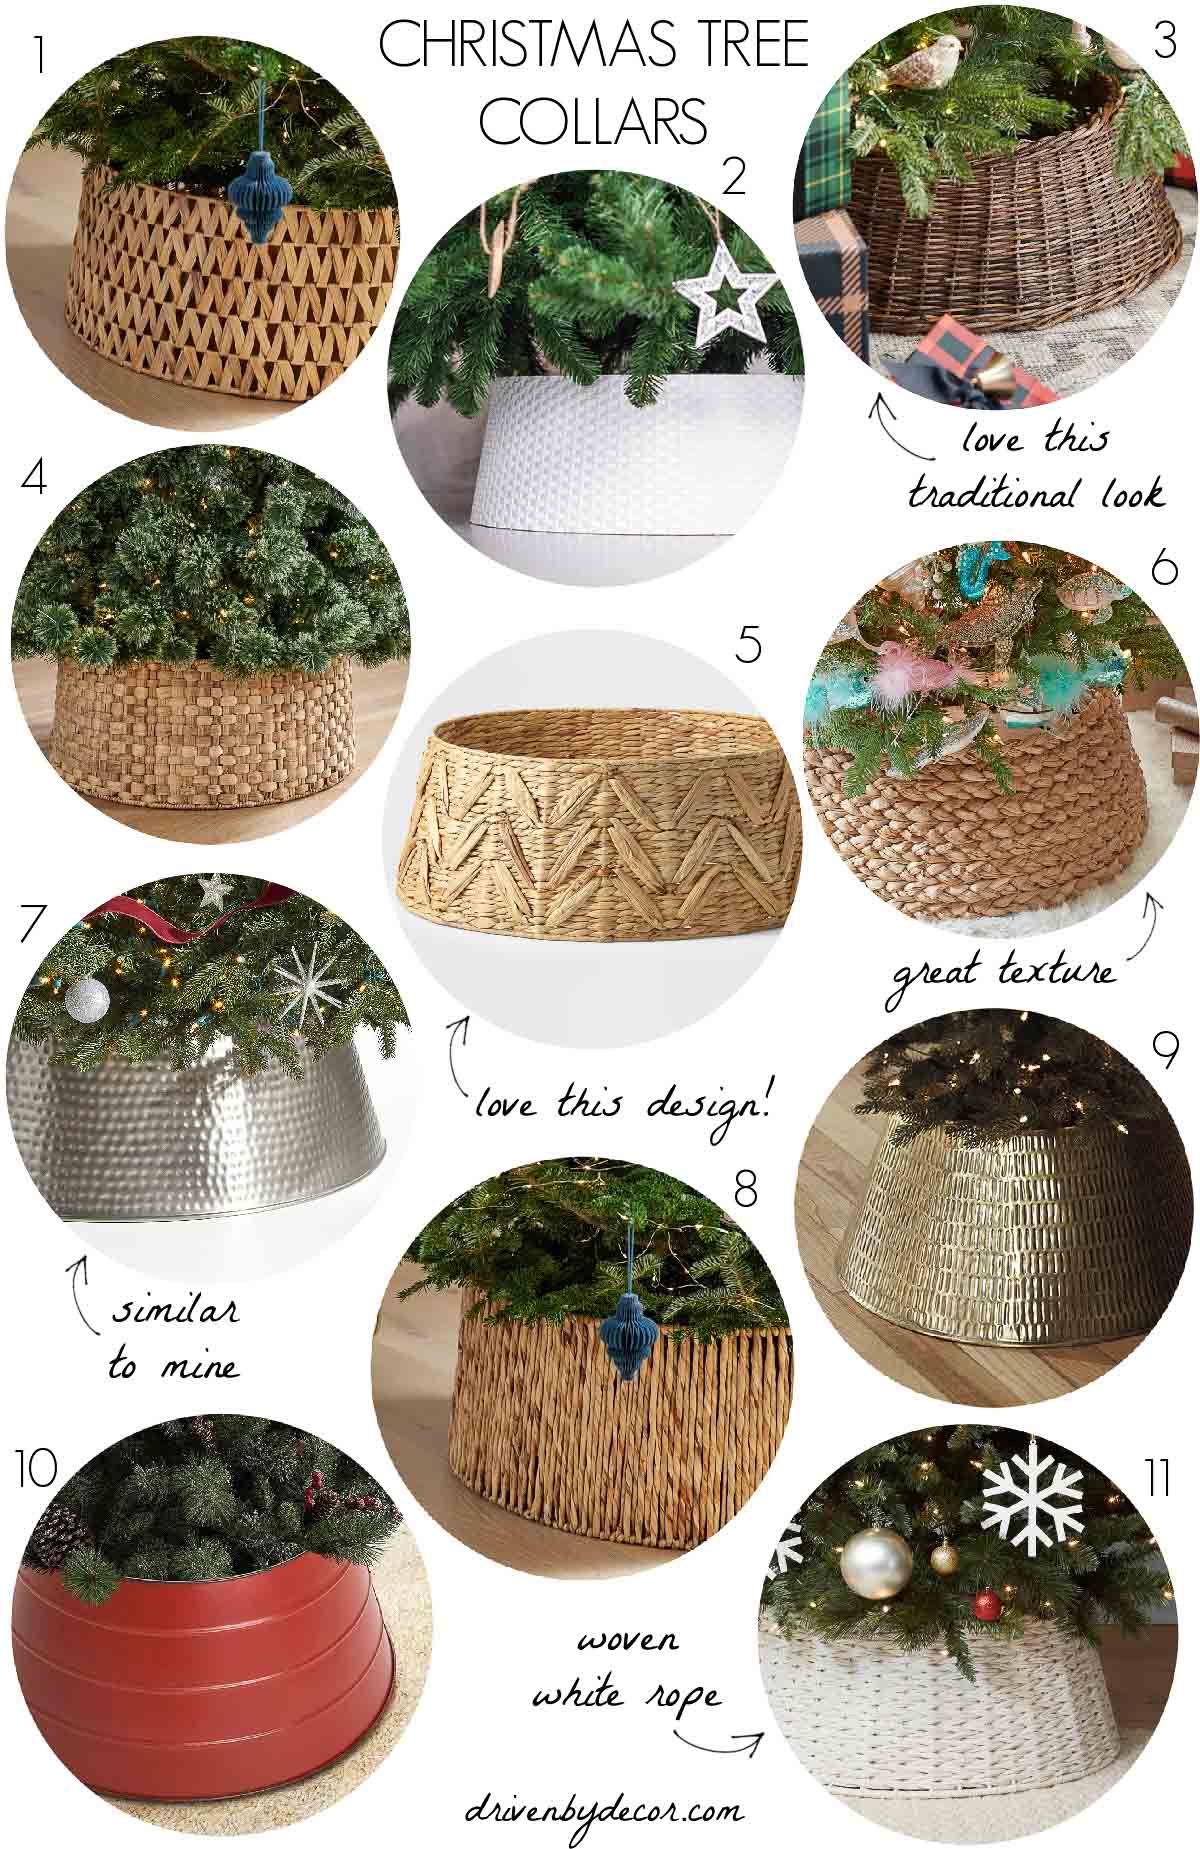 Christmas tree collars - love these instead of skirts!